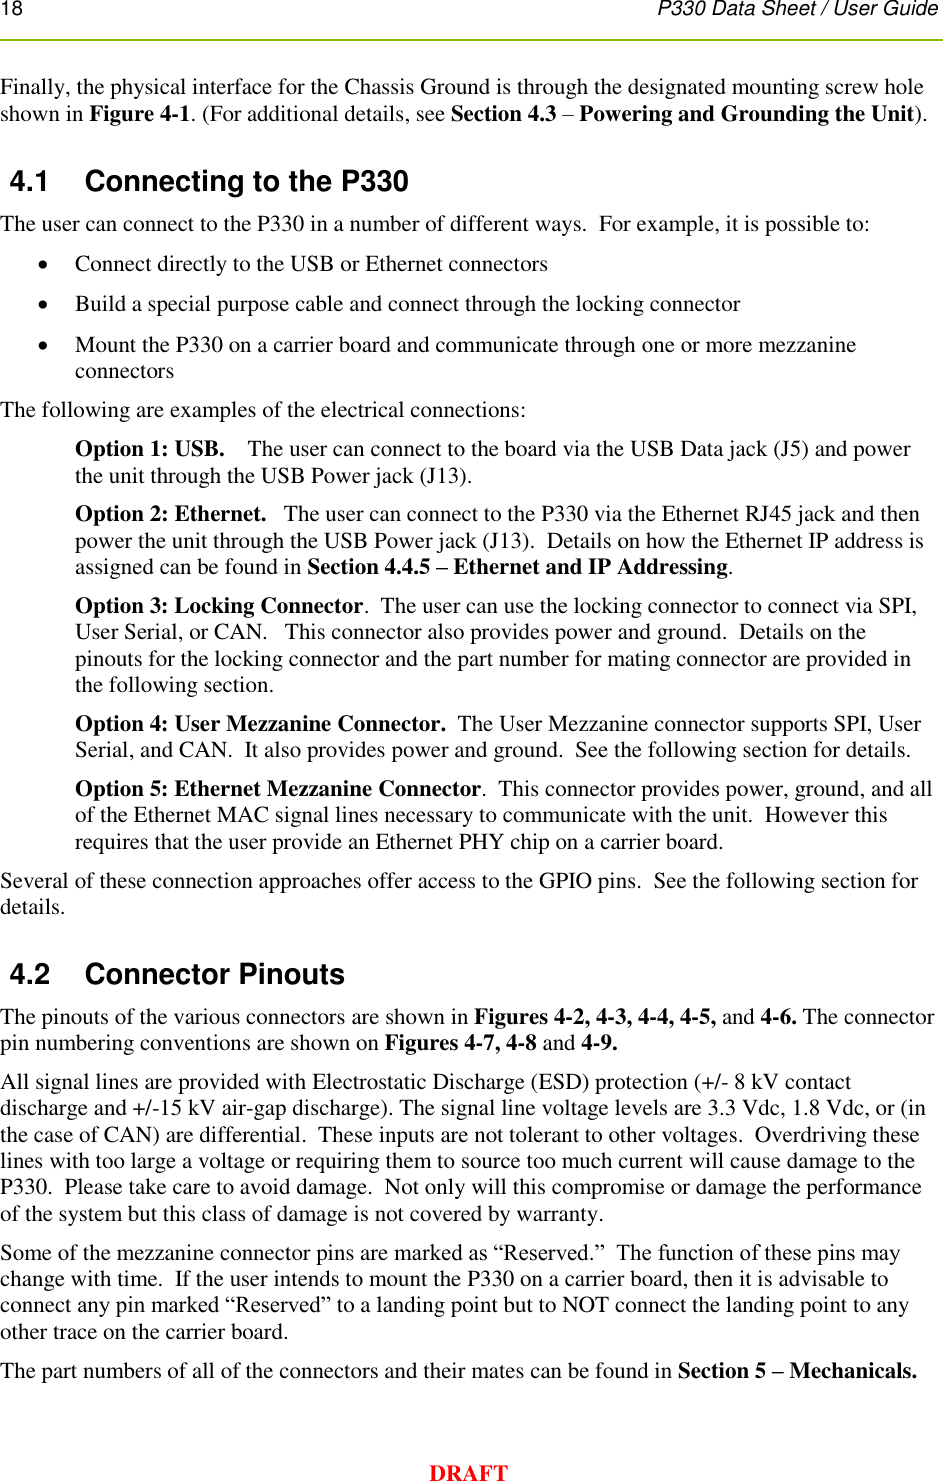 18      P330 Data Sheet / User Guide  DRAFT Finally, the physical interface for the Chassis Ground is through the designated mounting screw hole shown in Figure 4-1. (For additional details, see Section 4.3 – Powering and Grounding the Unit). 4.1  Connecting to the P330 The user can connect to the P330 in a number of different ways.  For example, it is possible to:   Connect directly to the USB or Ethernet connectors  Build a special purpose cable and connect through the locking connector  Mount the P330 on a carrier board and communicate through one or more mezzanine connectors  The following are examples of the electrical connections: Option 1: USB.    The user can connect to the board via the USB Data jack (J5) and power the unit through the USB Power jack (J13). Option 2: Ethernet.   The user can connect to the P330 via the Ethernet RJ45 jack and then power the unit through the USB Power jack (J13).  Details on how the Ethernet IP address is assigned can be found in Section 4.4.5 – Ethernet and IP Addressing.   Option 3: Locking Connector.  The user can use the locking connector to connect via SPI, User Serial, or CAN.   This connector also provides power and ground.  Details on the pinouts for the locking connector and the part number for mating connector are provided in the following section.    Option 4: User Mezzanine Connector.  The User Mezzanine connector supports SPI, User Serial, and CAN.  It also provides power and ground.  See the following section for details. Option 5: Ethernet Mezzanine Connector.  This connector provides power, ground, and all of the Ethernet MAC signal lines necessary to communicate with the unit.  However this requires that the user provide an Ethernet PHY chip on a carrier board. Several of these connection approaches offer access to the GPIO pins.  See the following section for details. 4.2  Connector Pinouts The pinouts of the various connectors are shown in Figures 4-2, 4-3, 4-4, 4-5, and 4-6. The connector pin numbering conventions are shown on Figures 4-7, 4-8 and 4-9. All signal lines are provided with Electrostatic Discharge (ESD) protection (+/- 8 kV contact discharge and +/-15 kV air-gap discharge). The signal line voltage levels are 3.3 Vdc, 1.8 Vdc, or (in the case of CAN) are differential.  These inputs are not tolerant to other voltages.  Overdriving these lines with too large a voltage or requiring them to source too much current will cause damage to the P330.  Please take care to avoid damage.  Not only will this compromise or damage the performance of the system but this class of damage is not covered by warranty. Some of the mezzanine connector pins are marked as “Reserved.”  The function of these pins may change with time.  If the user intends to mount the P330 on a carrier board, then it is advisable to connect any pin marked “Reserved” to a landing point but to NOT connect the landing point to any other trace on the carrier board. The part numbers of all of the connectors and their mates can be found in Section 5 – Mechanicals. 